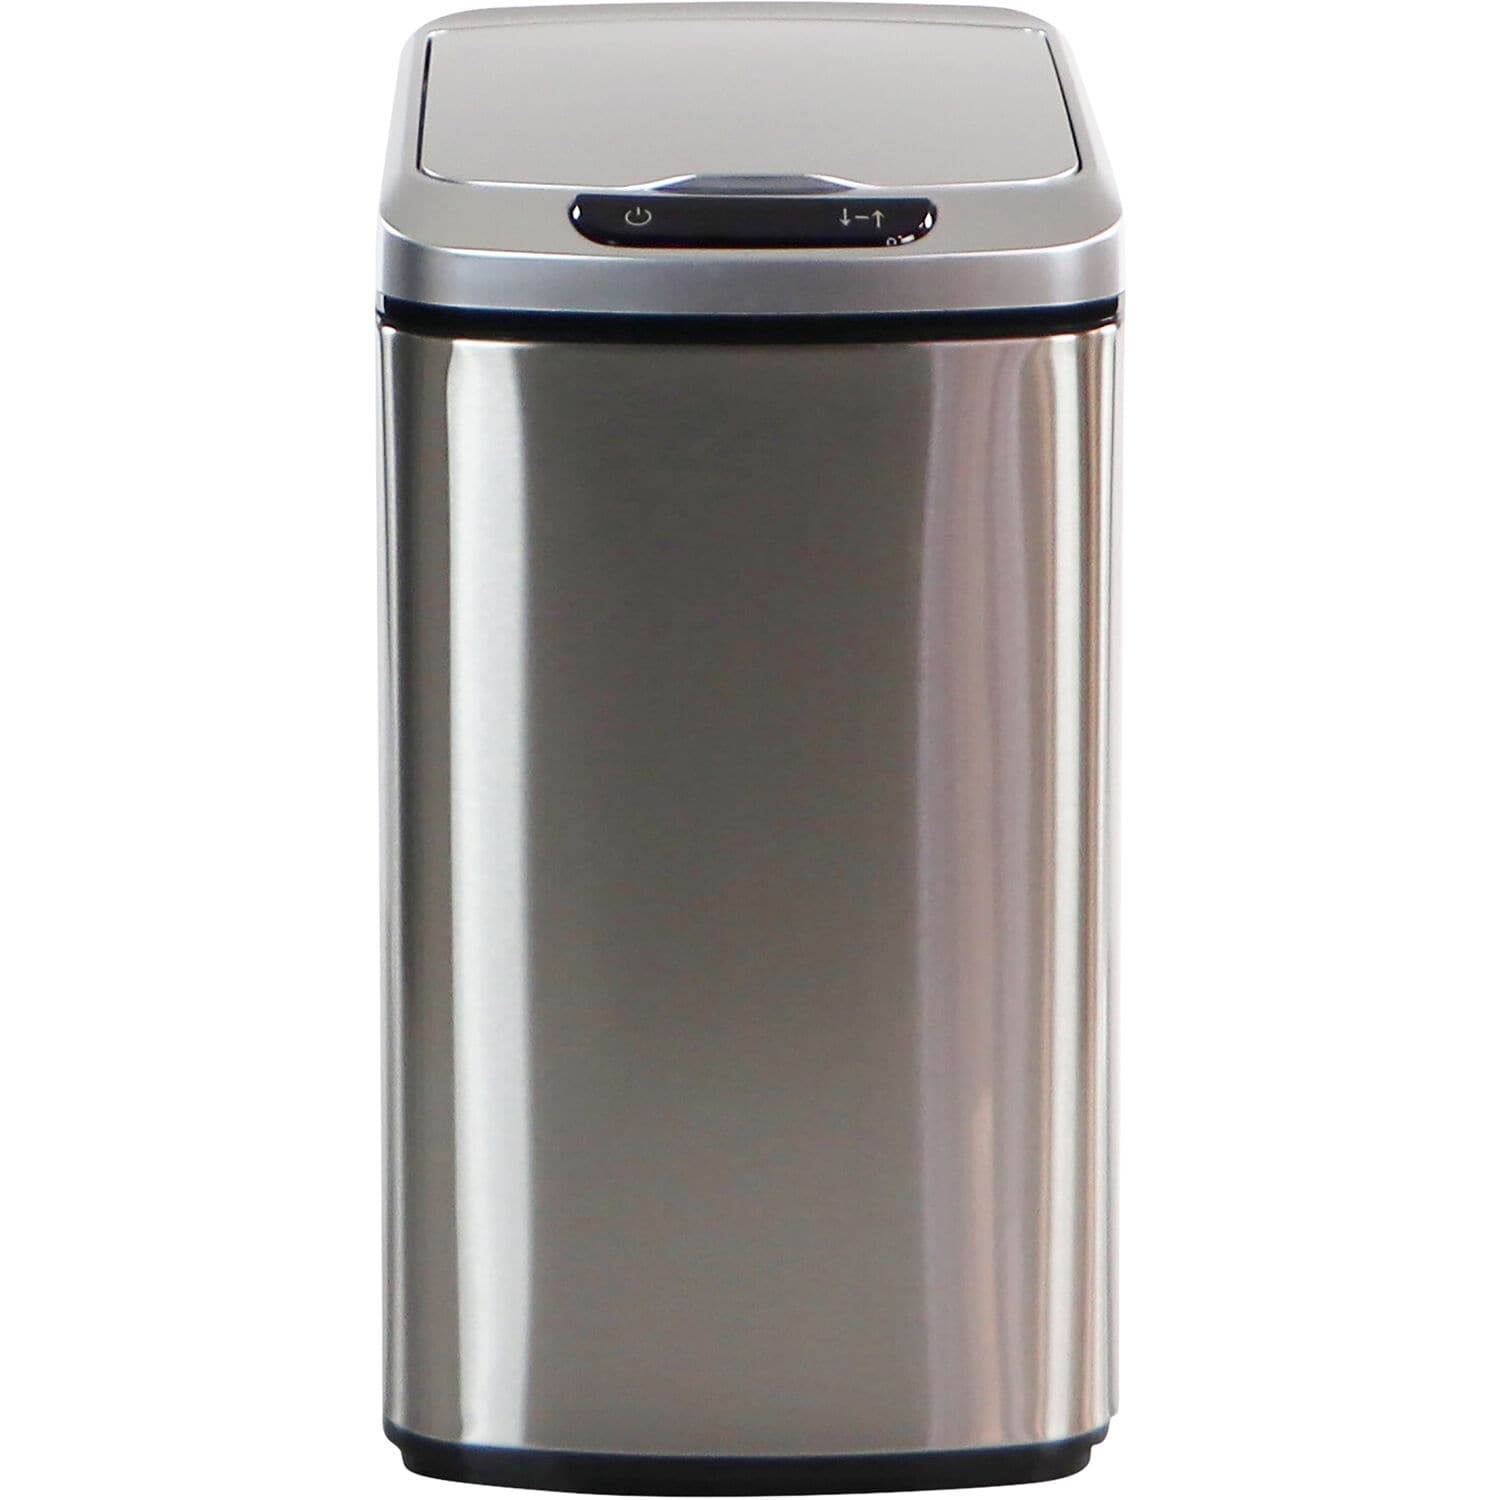 High Quality 3.2 Gallon Trash Can, Plastic Touchless Bathroom